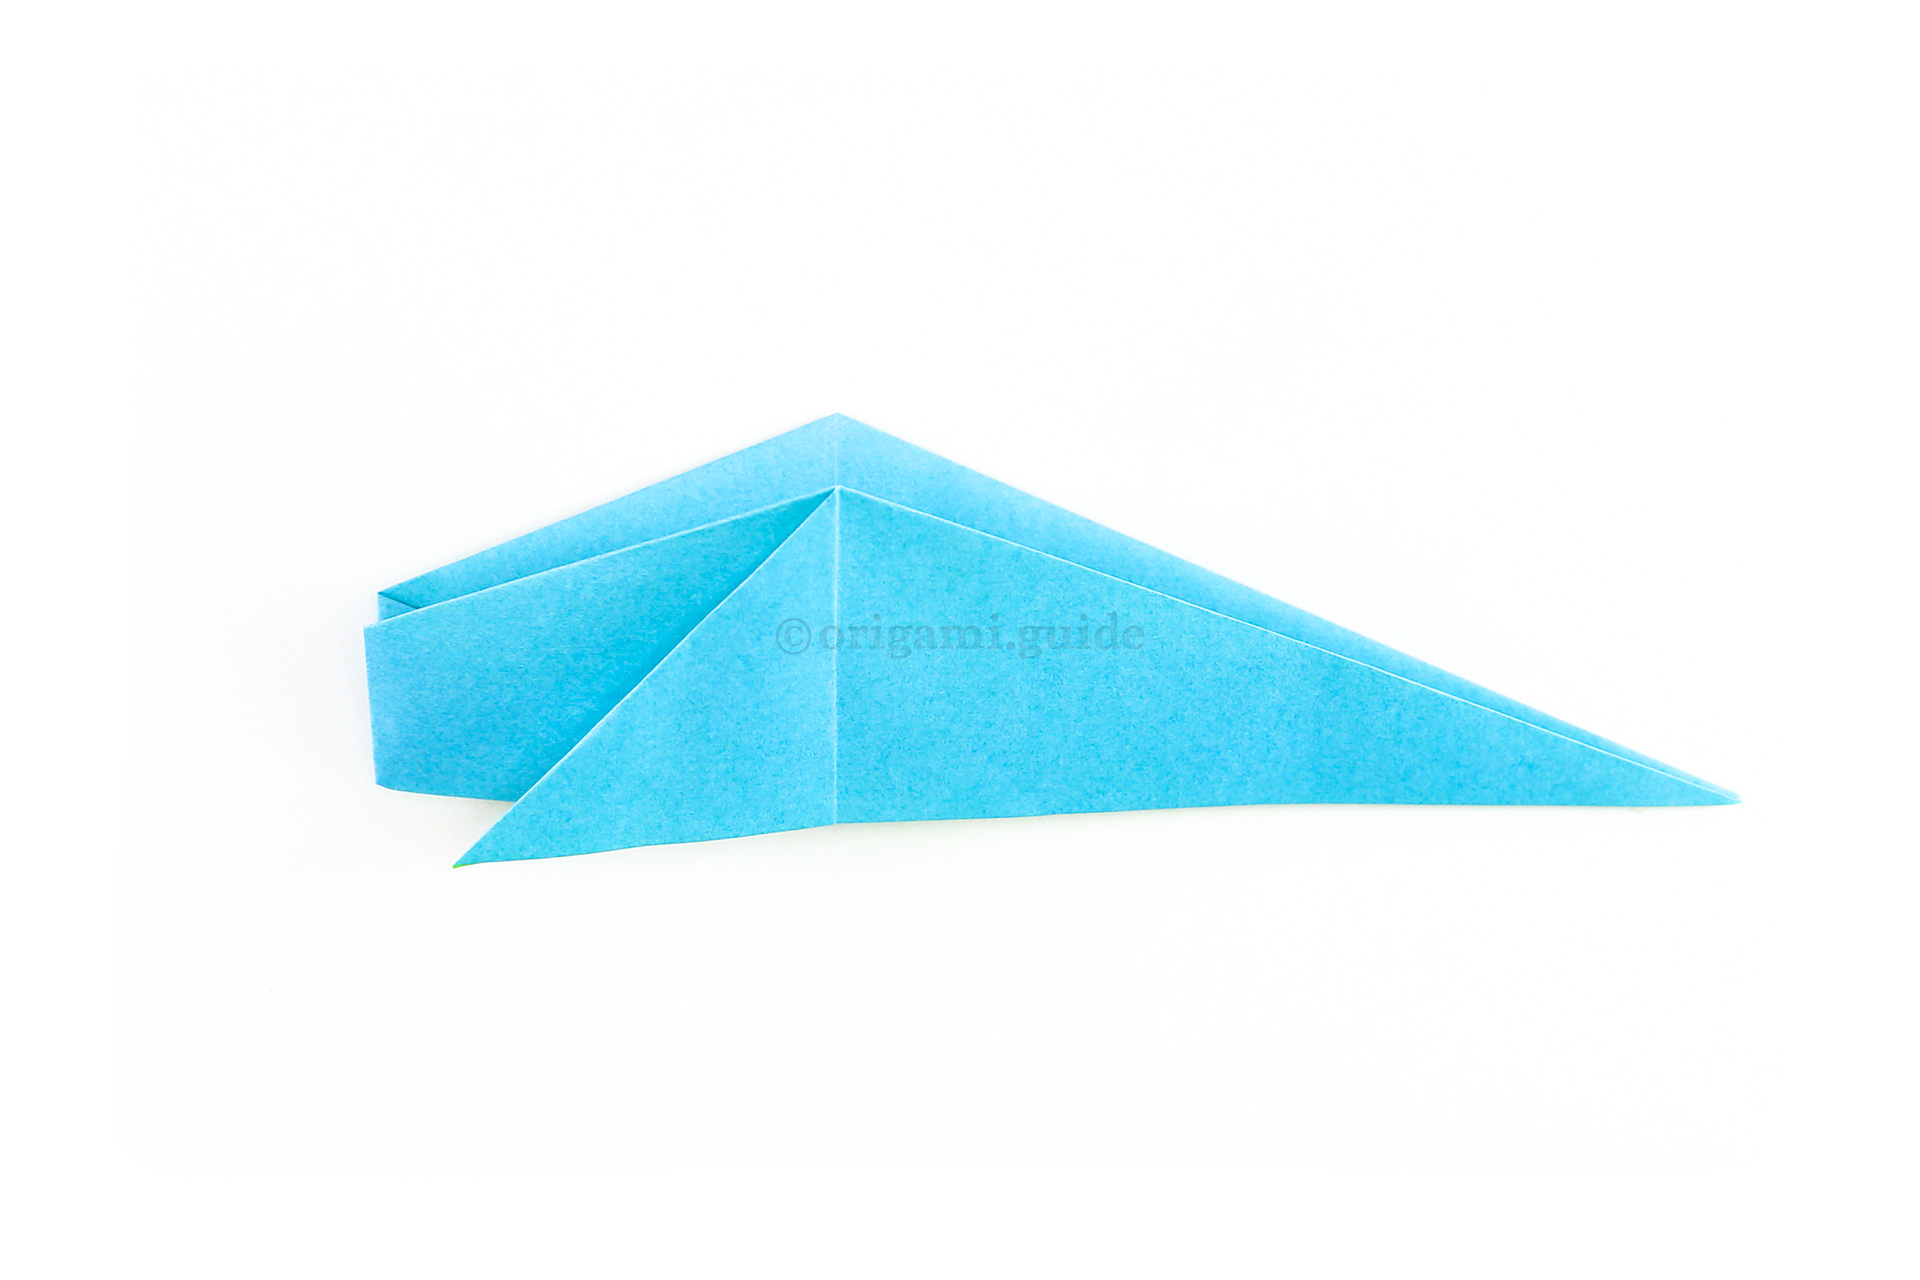 Fold the bottom section up to the top, revealing the shape of the whale.